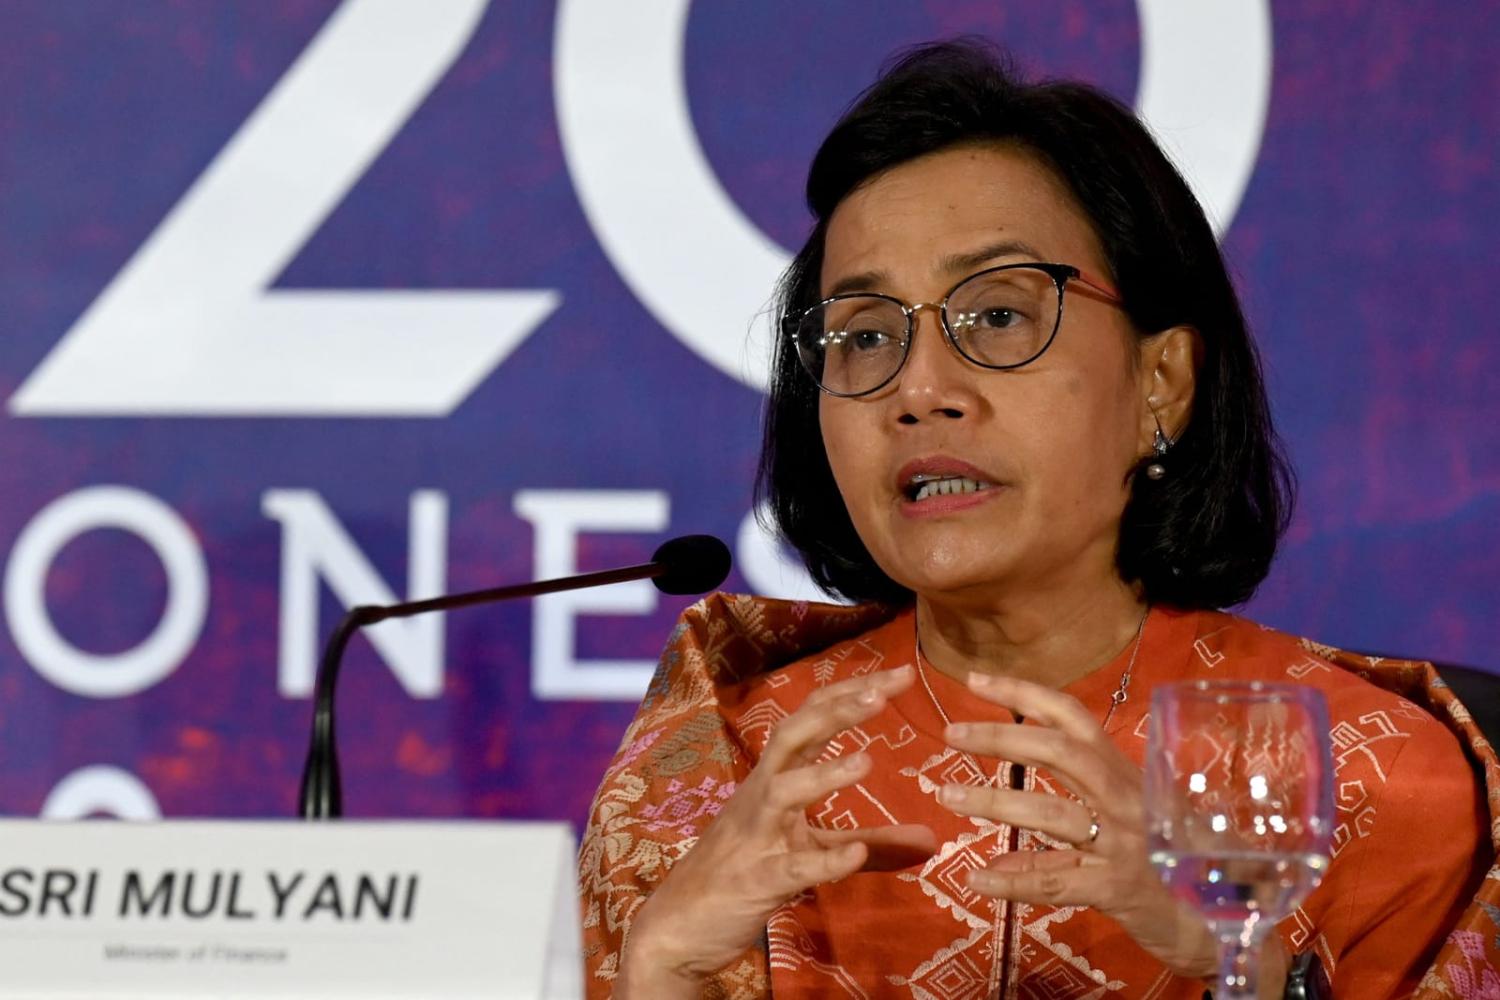 Indonesia's Finance Minister Sri Mulyani Indrawati says speeding up the adoption of online work due to the pandemic has changed the zeitgeist for women (Sonny Tumbelaka/AFP via Getty Images)